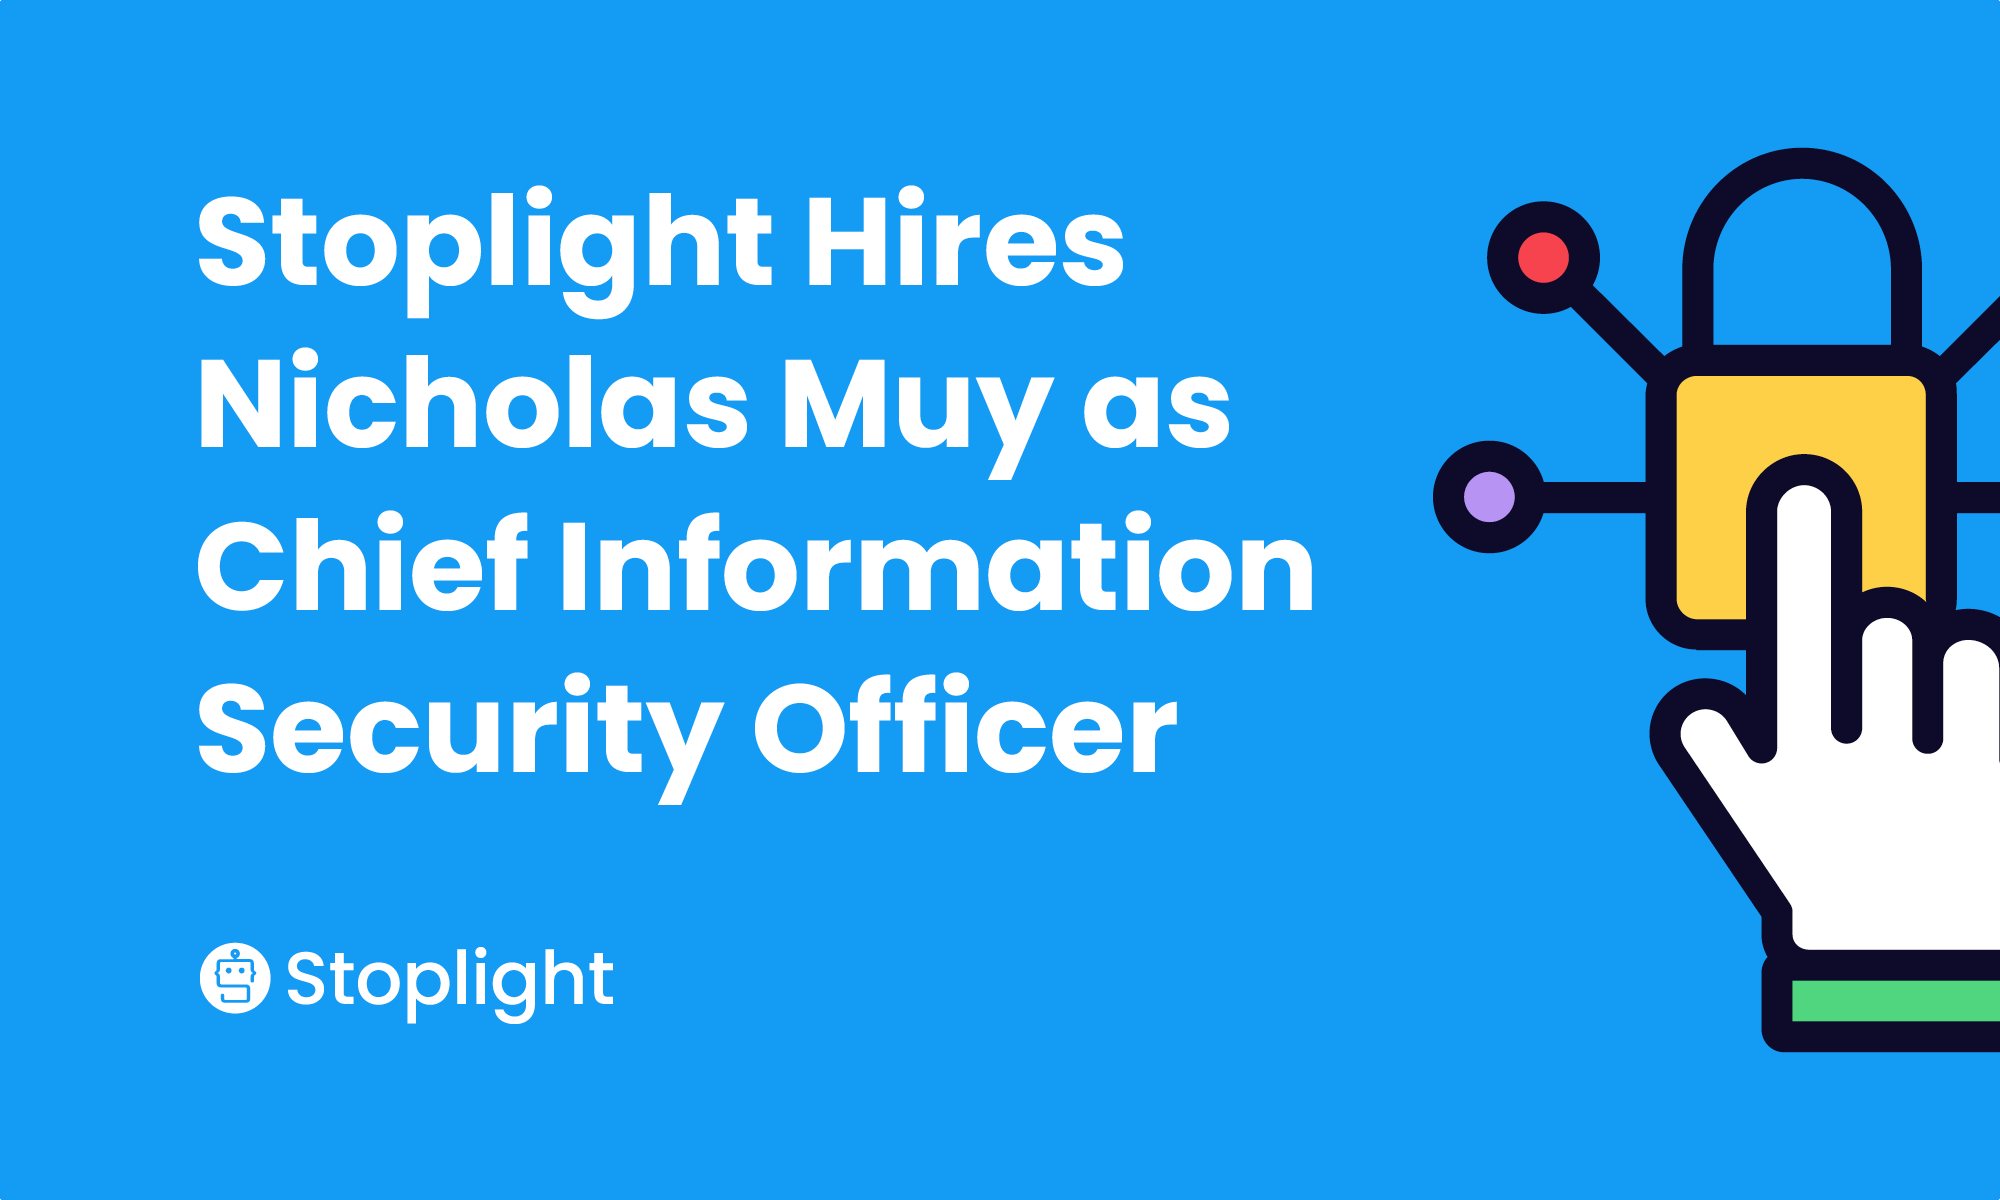 Stoplight Hires Nicholas Muy as Chief Information Security Officer